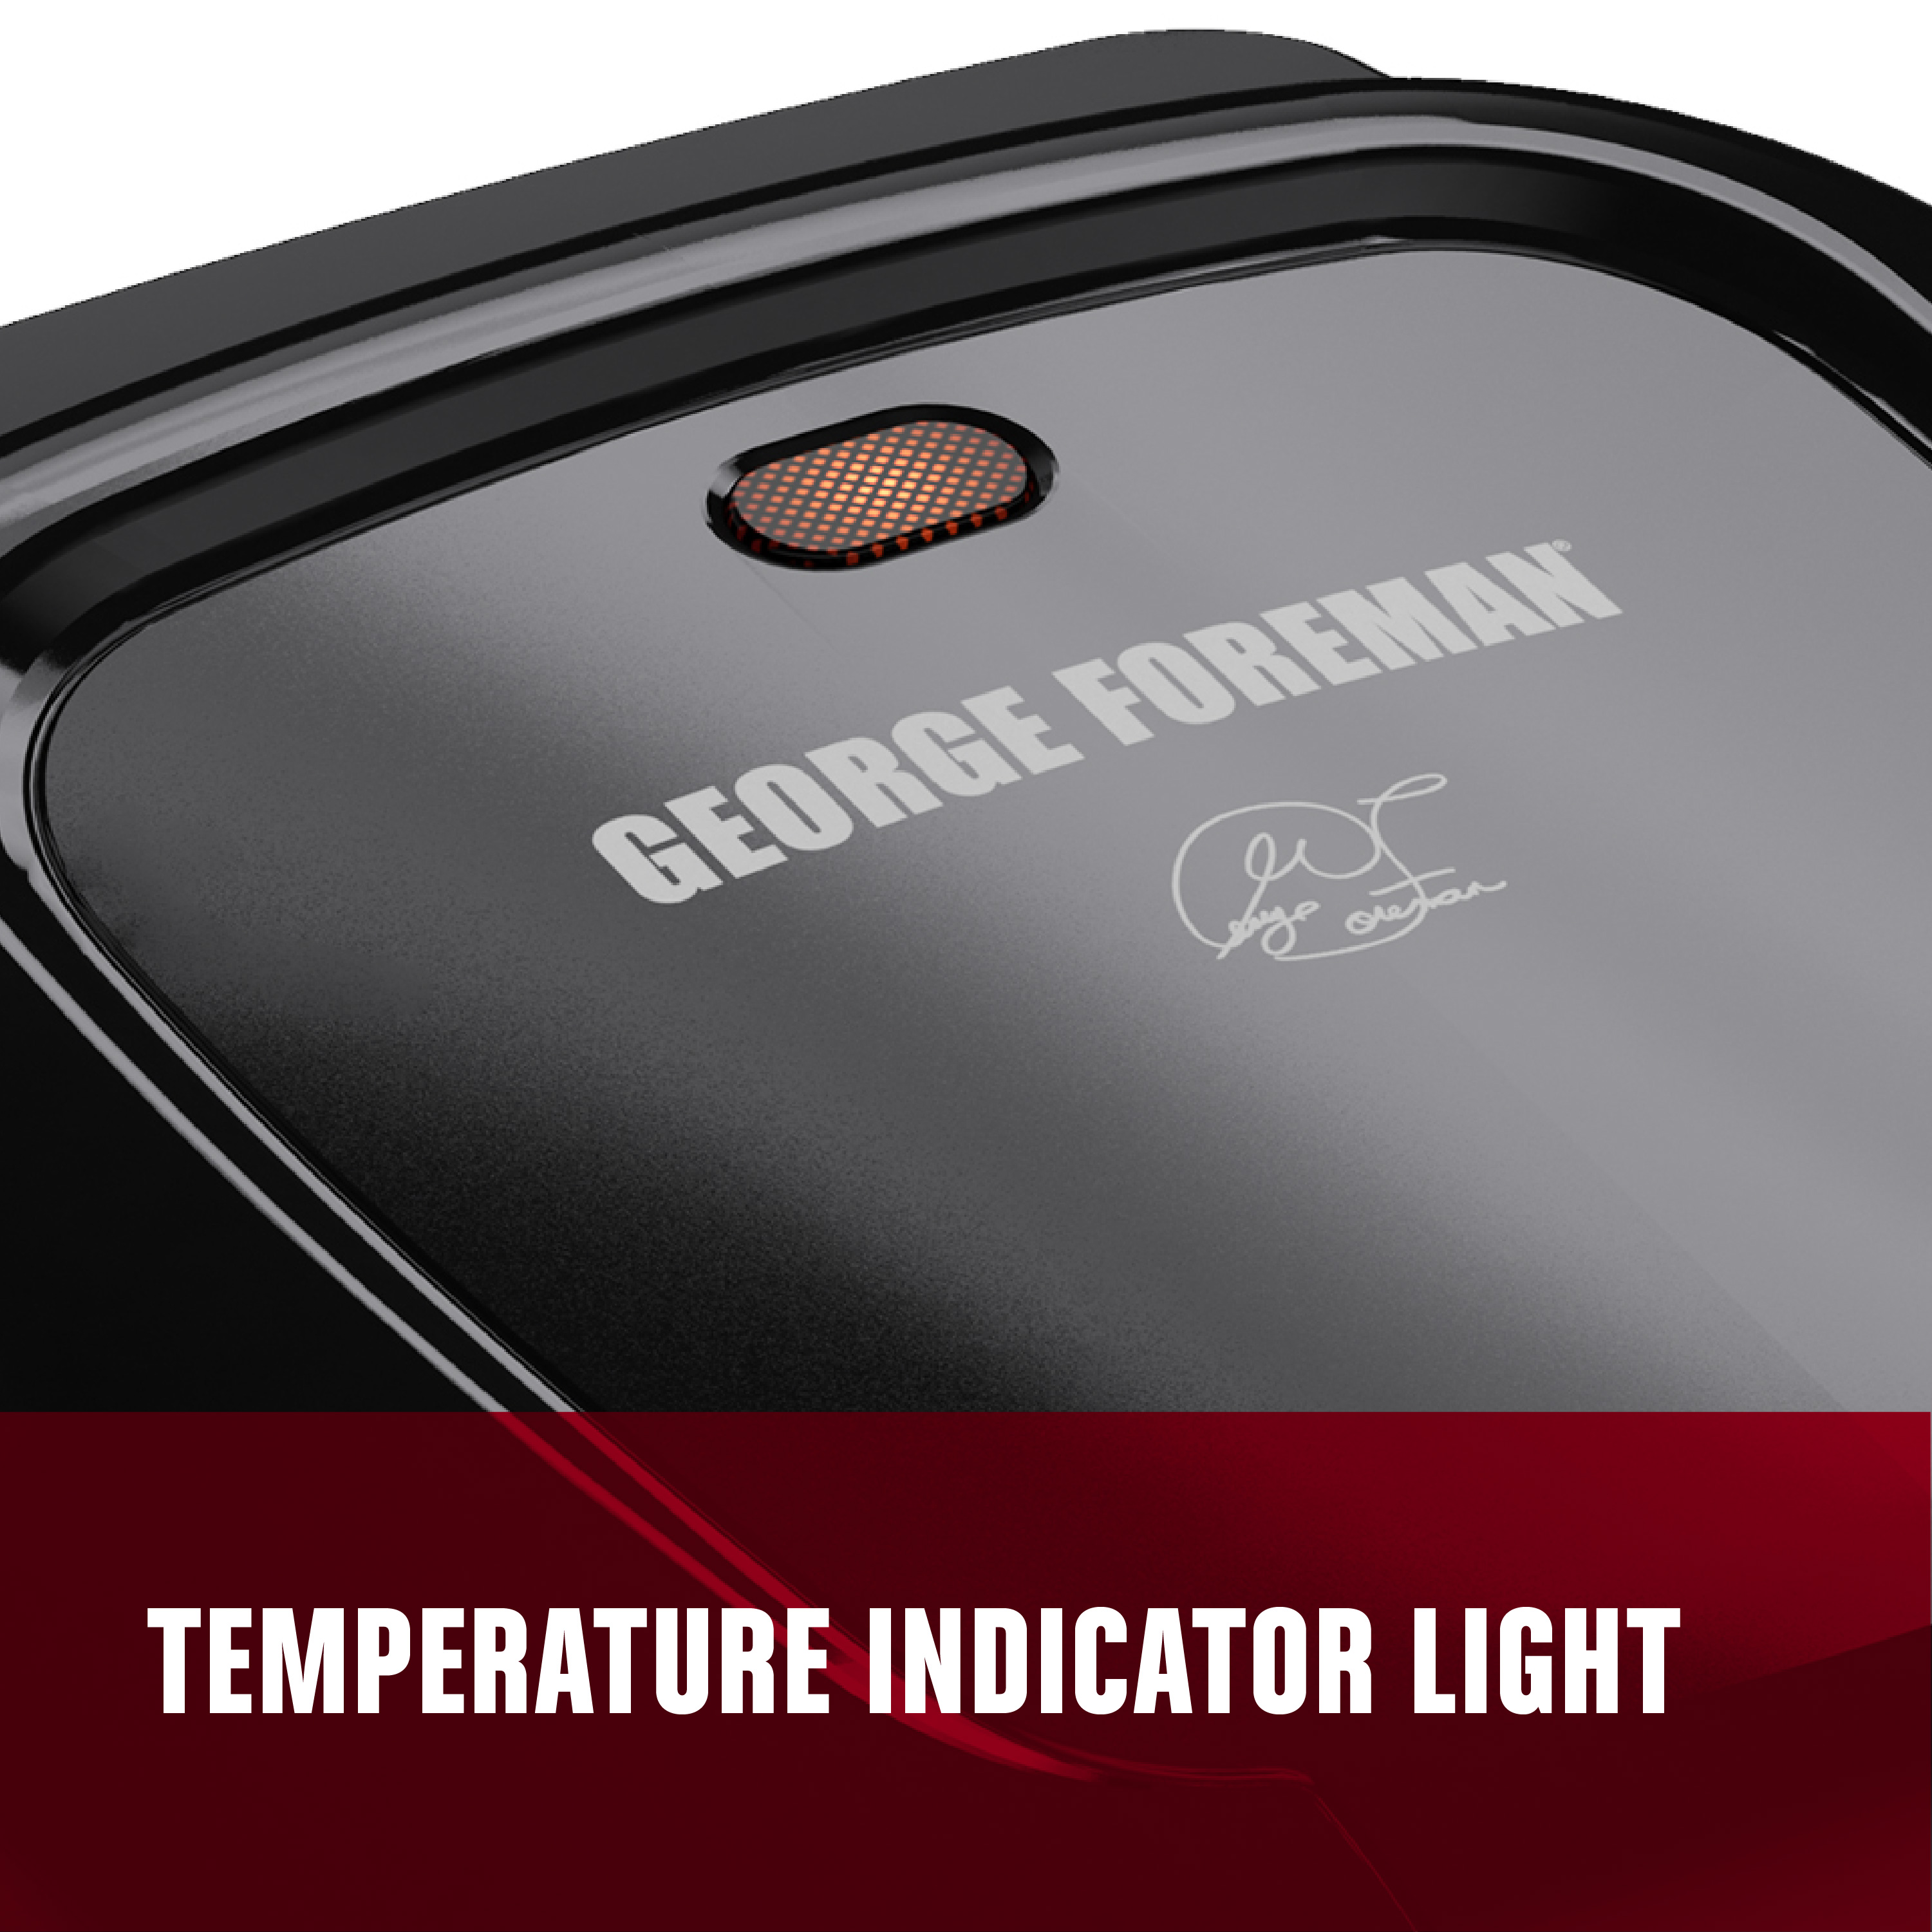 George Foreman 2-Serving Classic Plate Electric Indoor Grill and Panini Press, Black , GR0040B - image 5 of 7